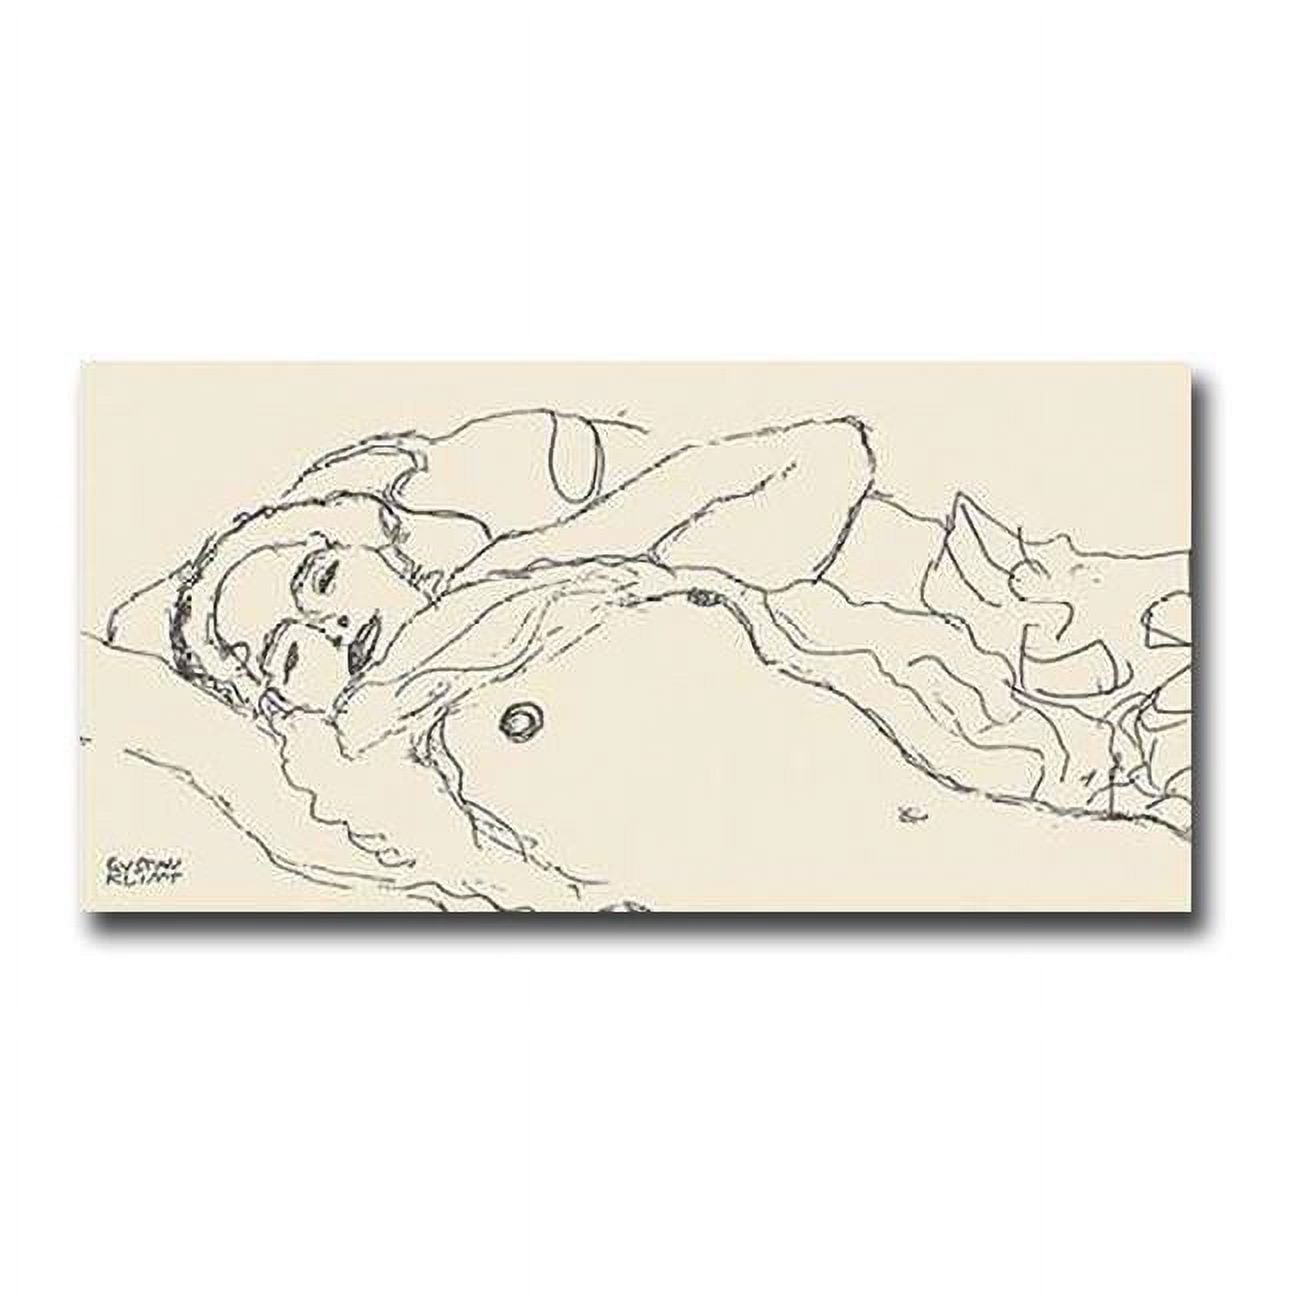 1224w612sag Reclined Woman By Gustav Klimt Premium Gallery-wrapped Canvas Giclee Art - Ready-to-hang, 12 X 24 X 1.5 In.